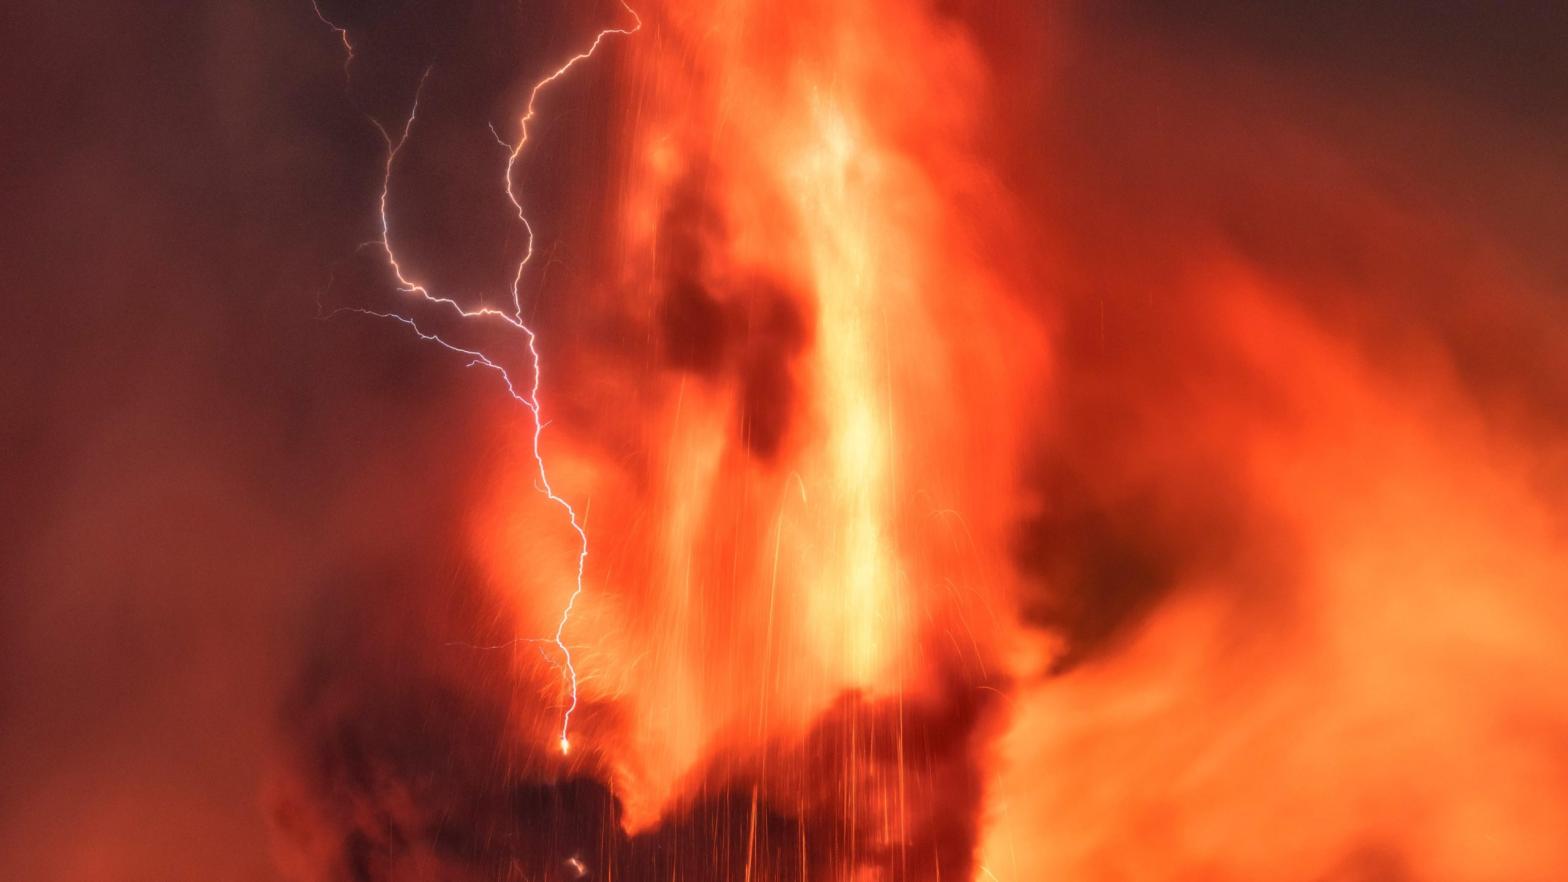 Volcanic lightning over Mount Etna in Sicily, Italy, during an eruption on Friday, Feb. 11, 2022.  (Photo: Emilio Messina, AP)